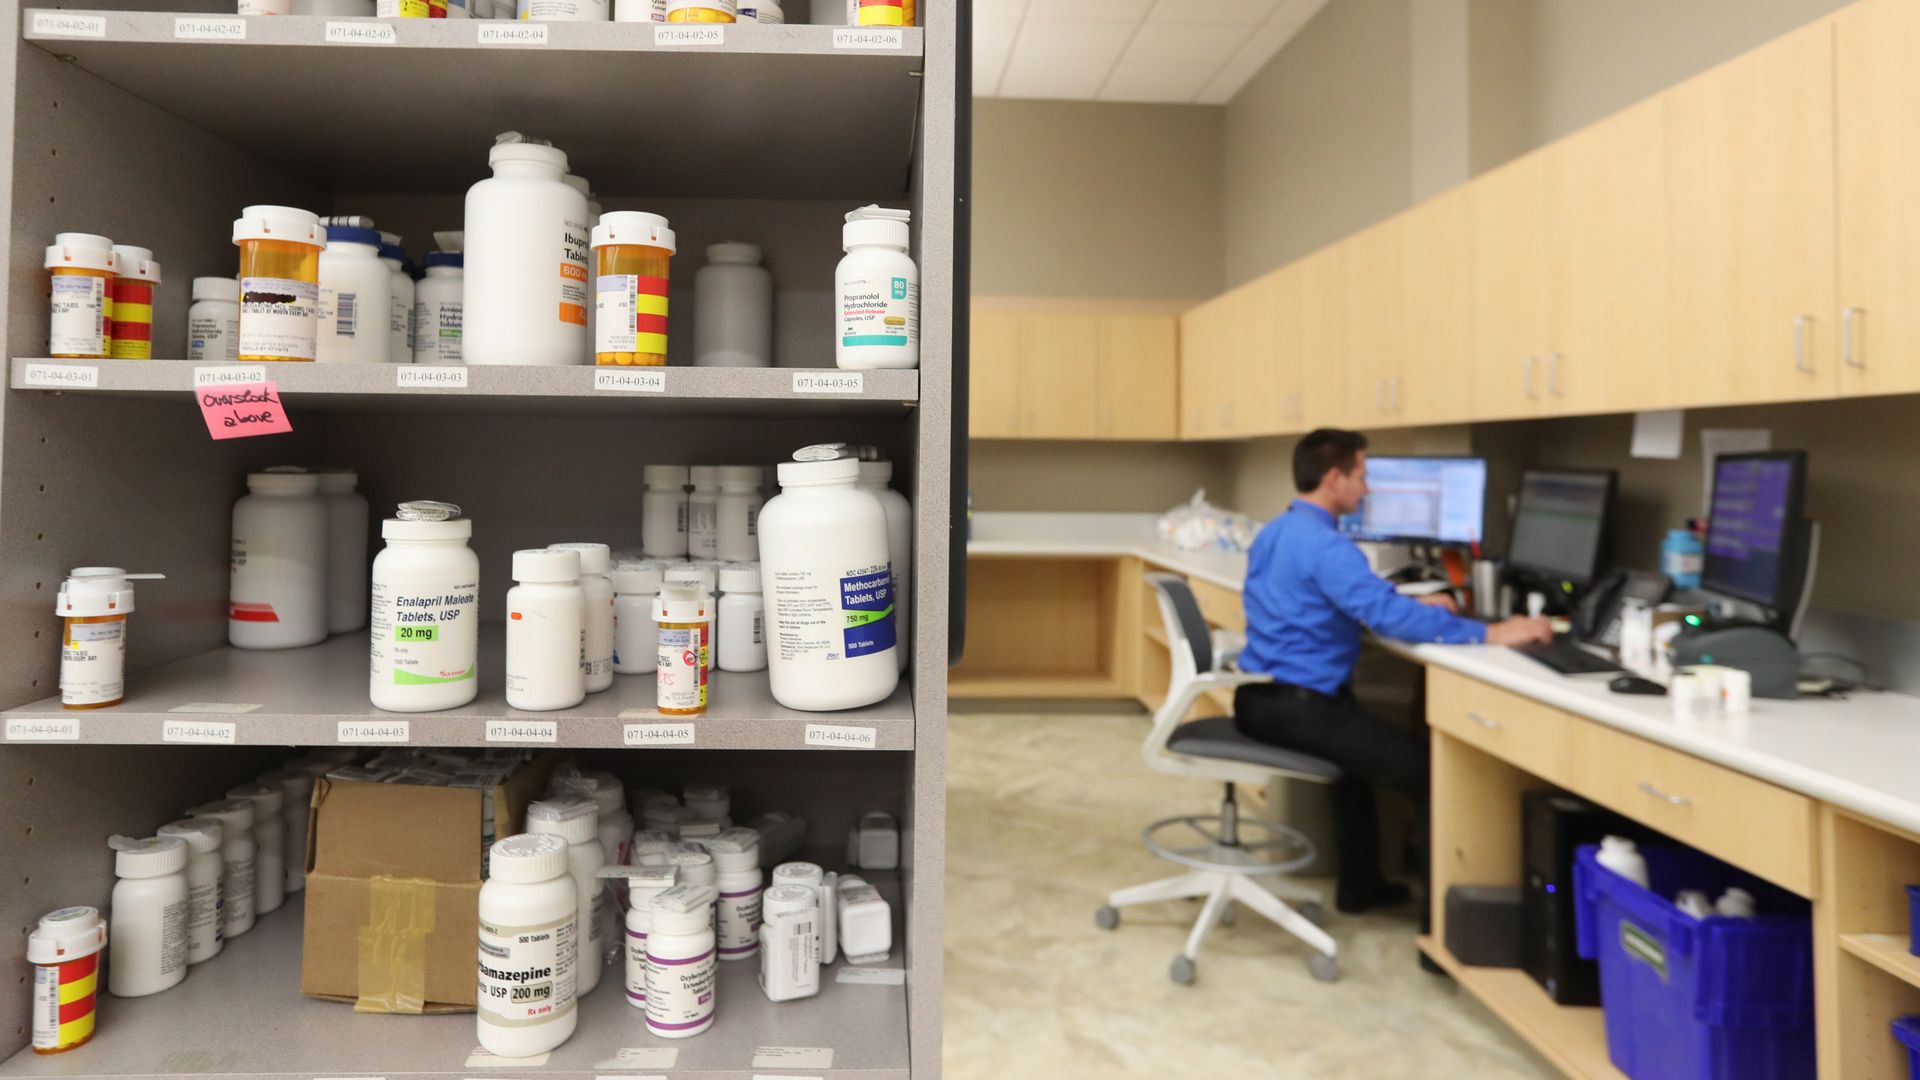 A pharmacy technician works at a desk with drugs sitting on a shelf in the foreground.